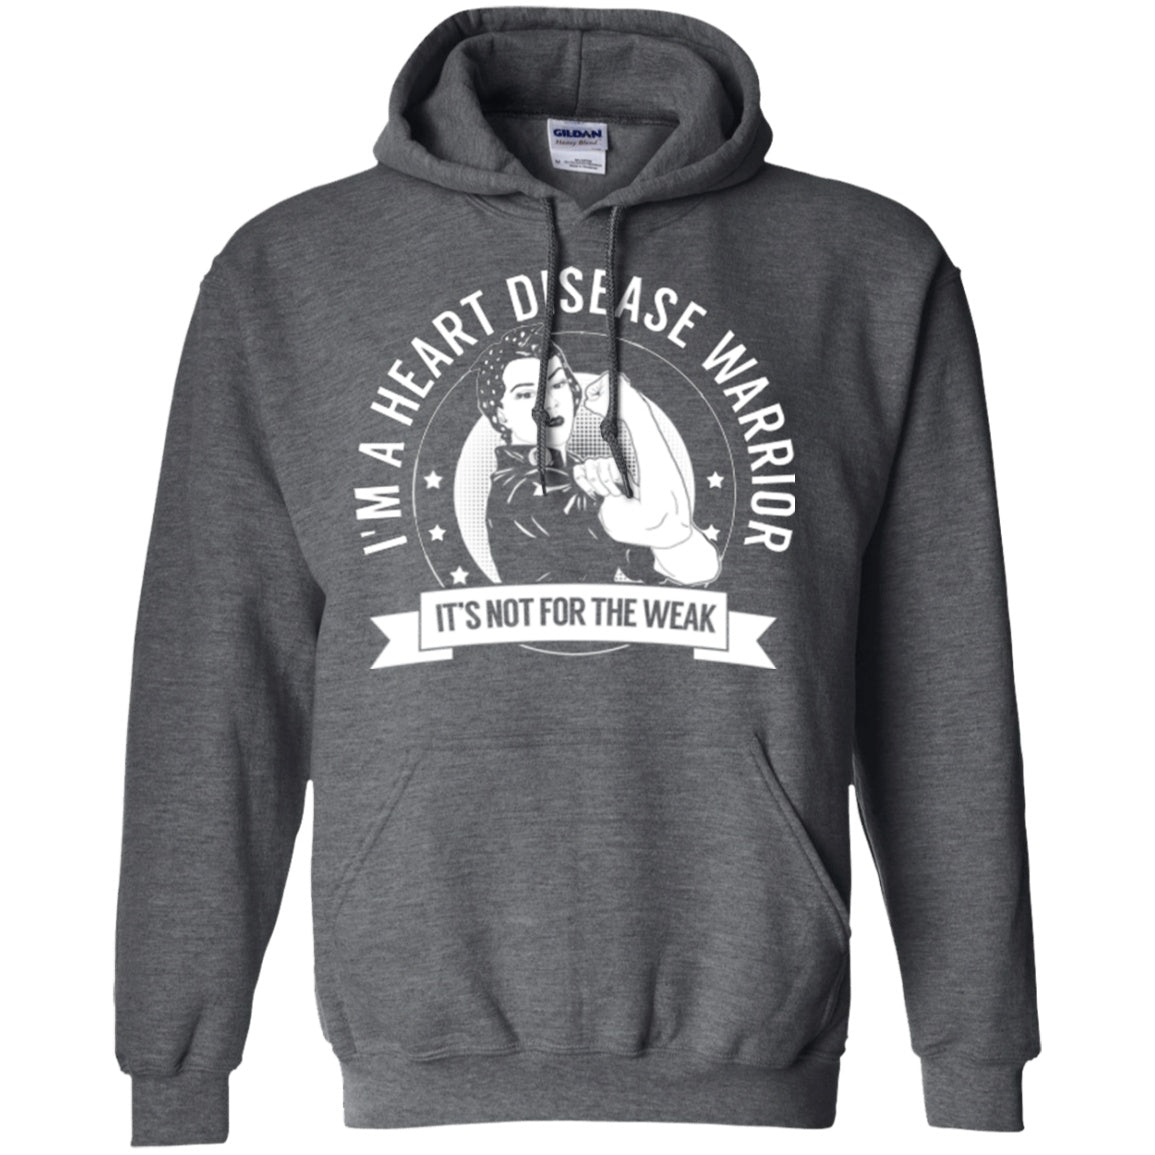 Heart Disease Warrior Not For The Weak Pullover Hoodie 8 oz. - The Unchargeables